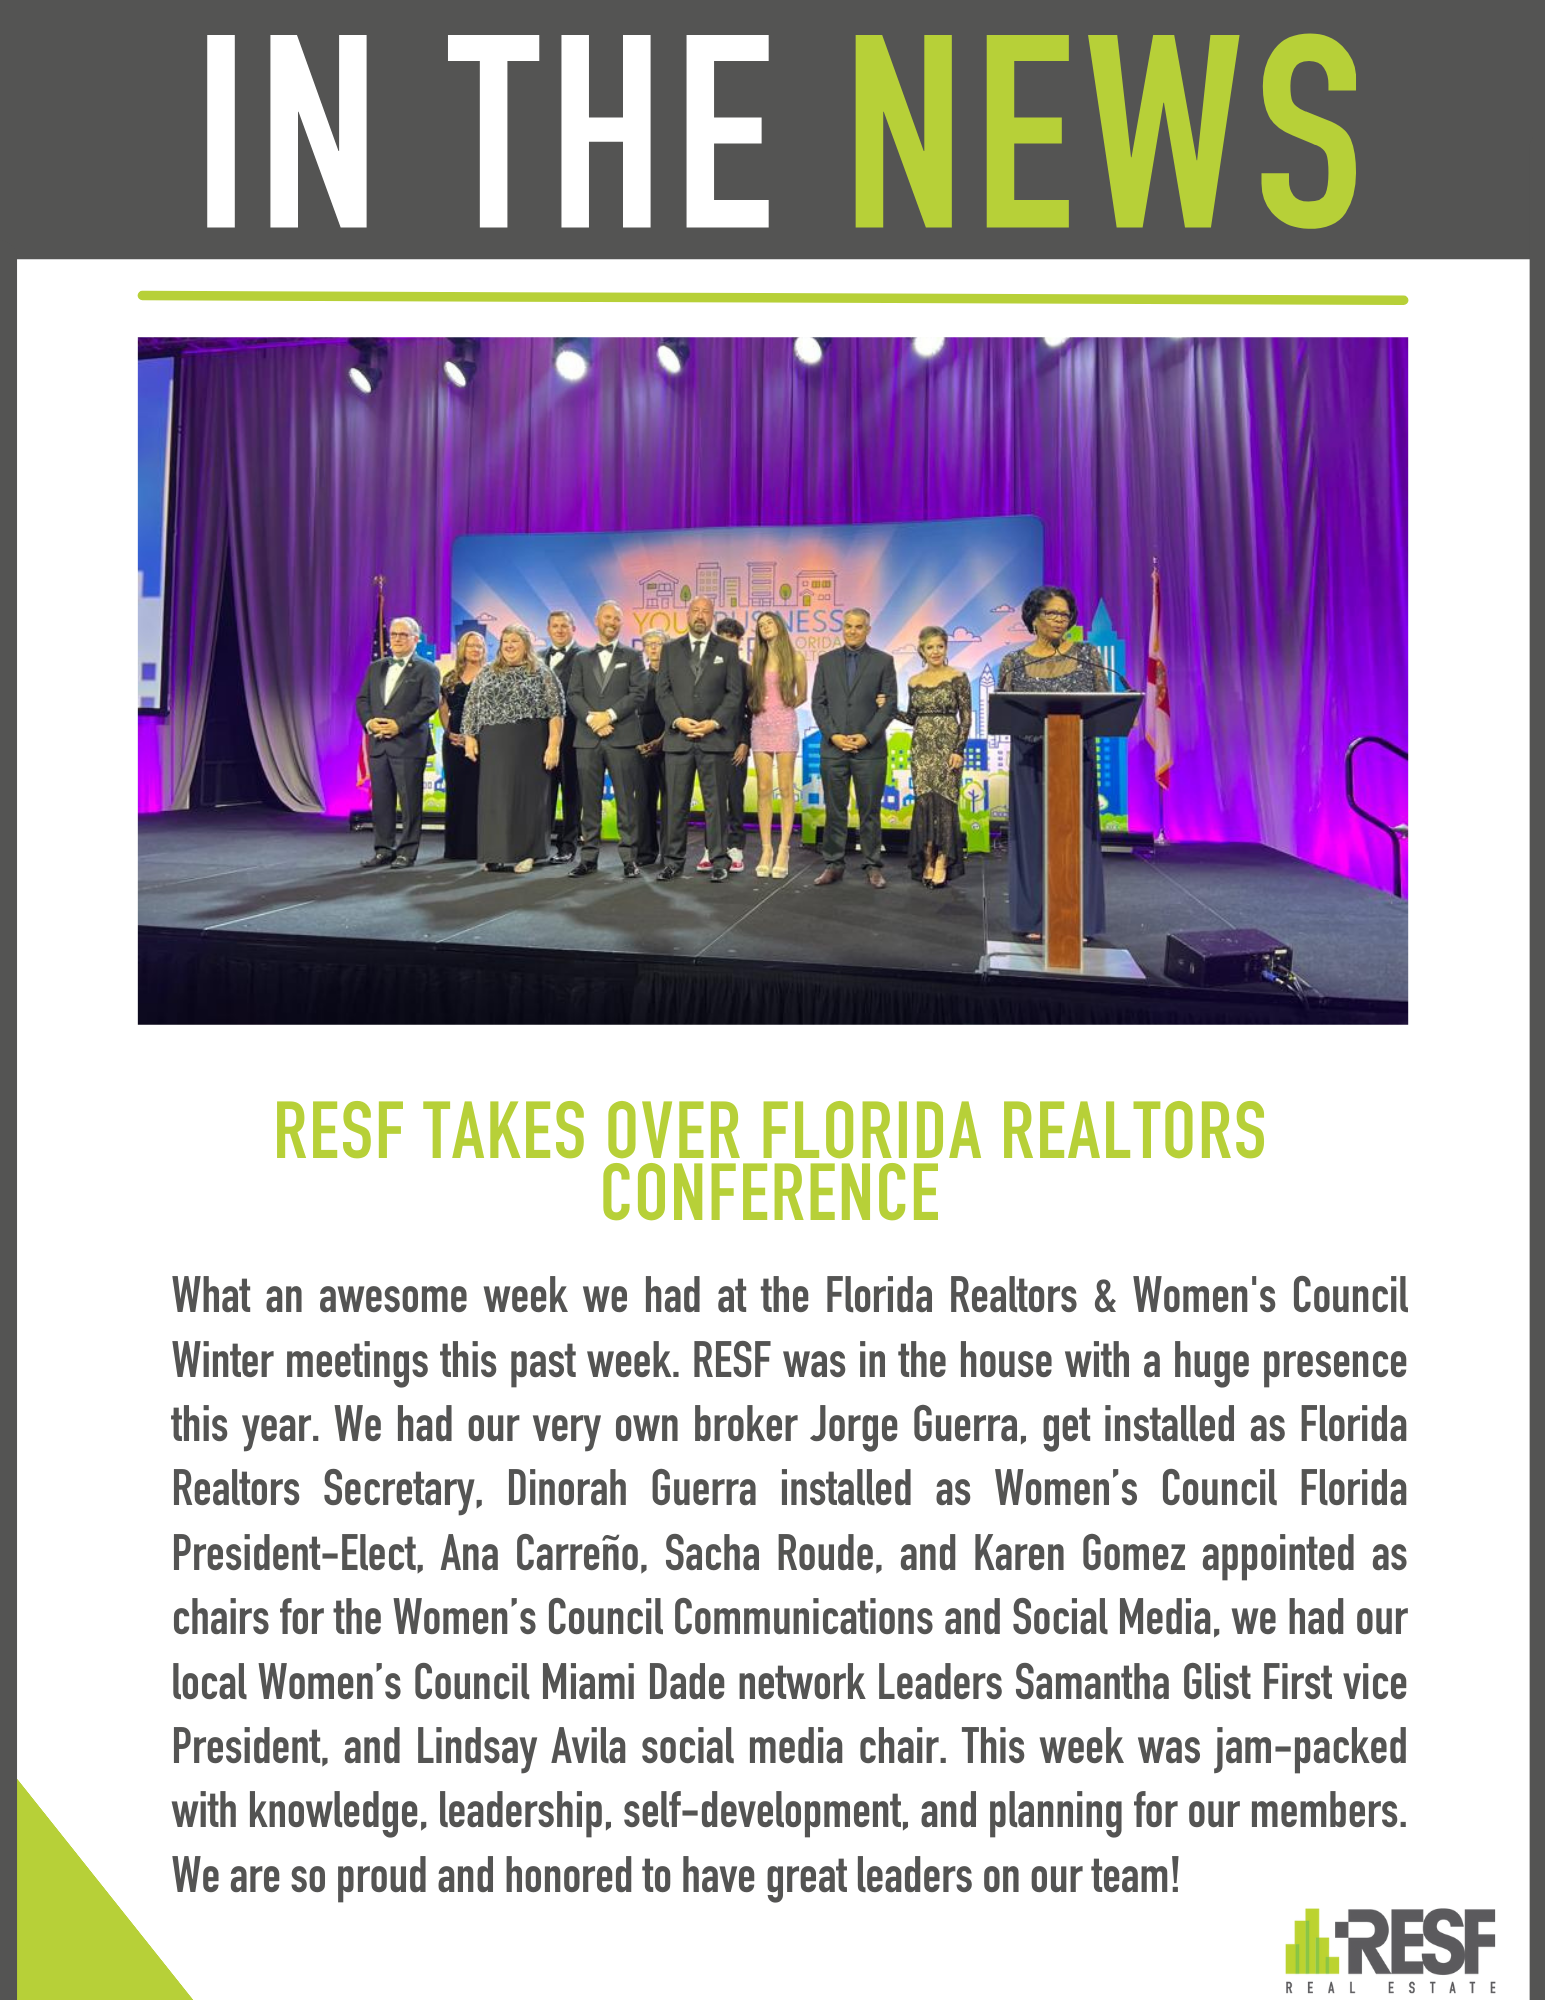 RESF TAKES OVER FLORIDA REALTORS CONFERENCE